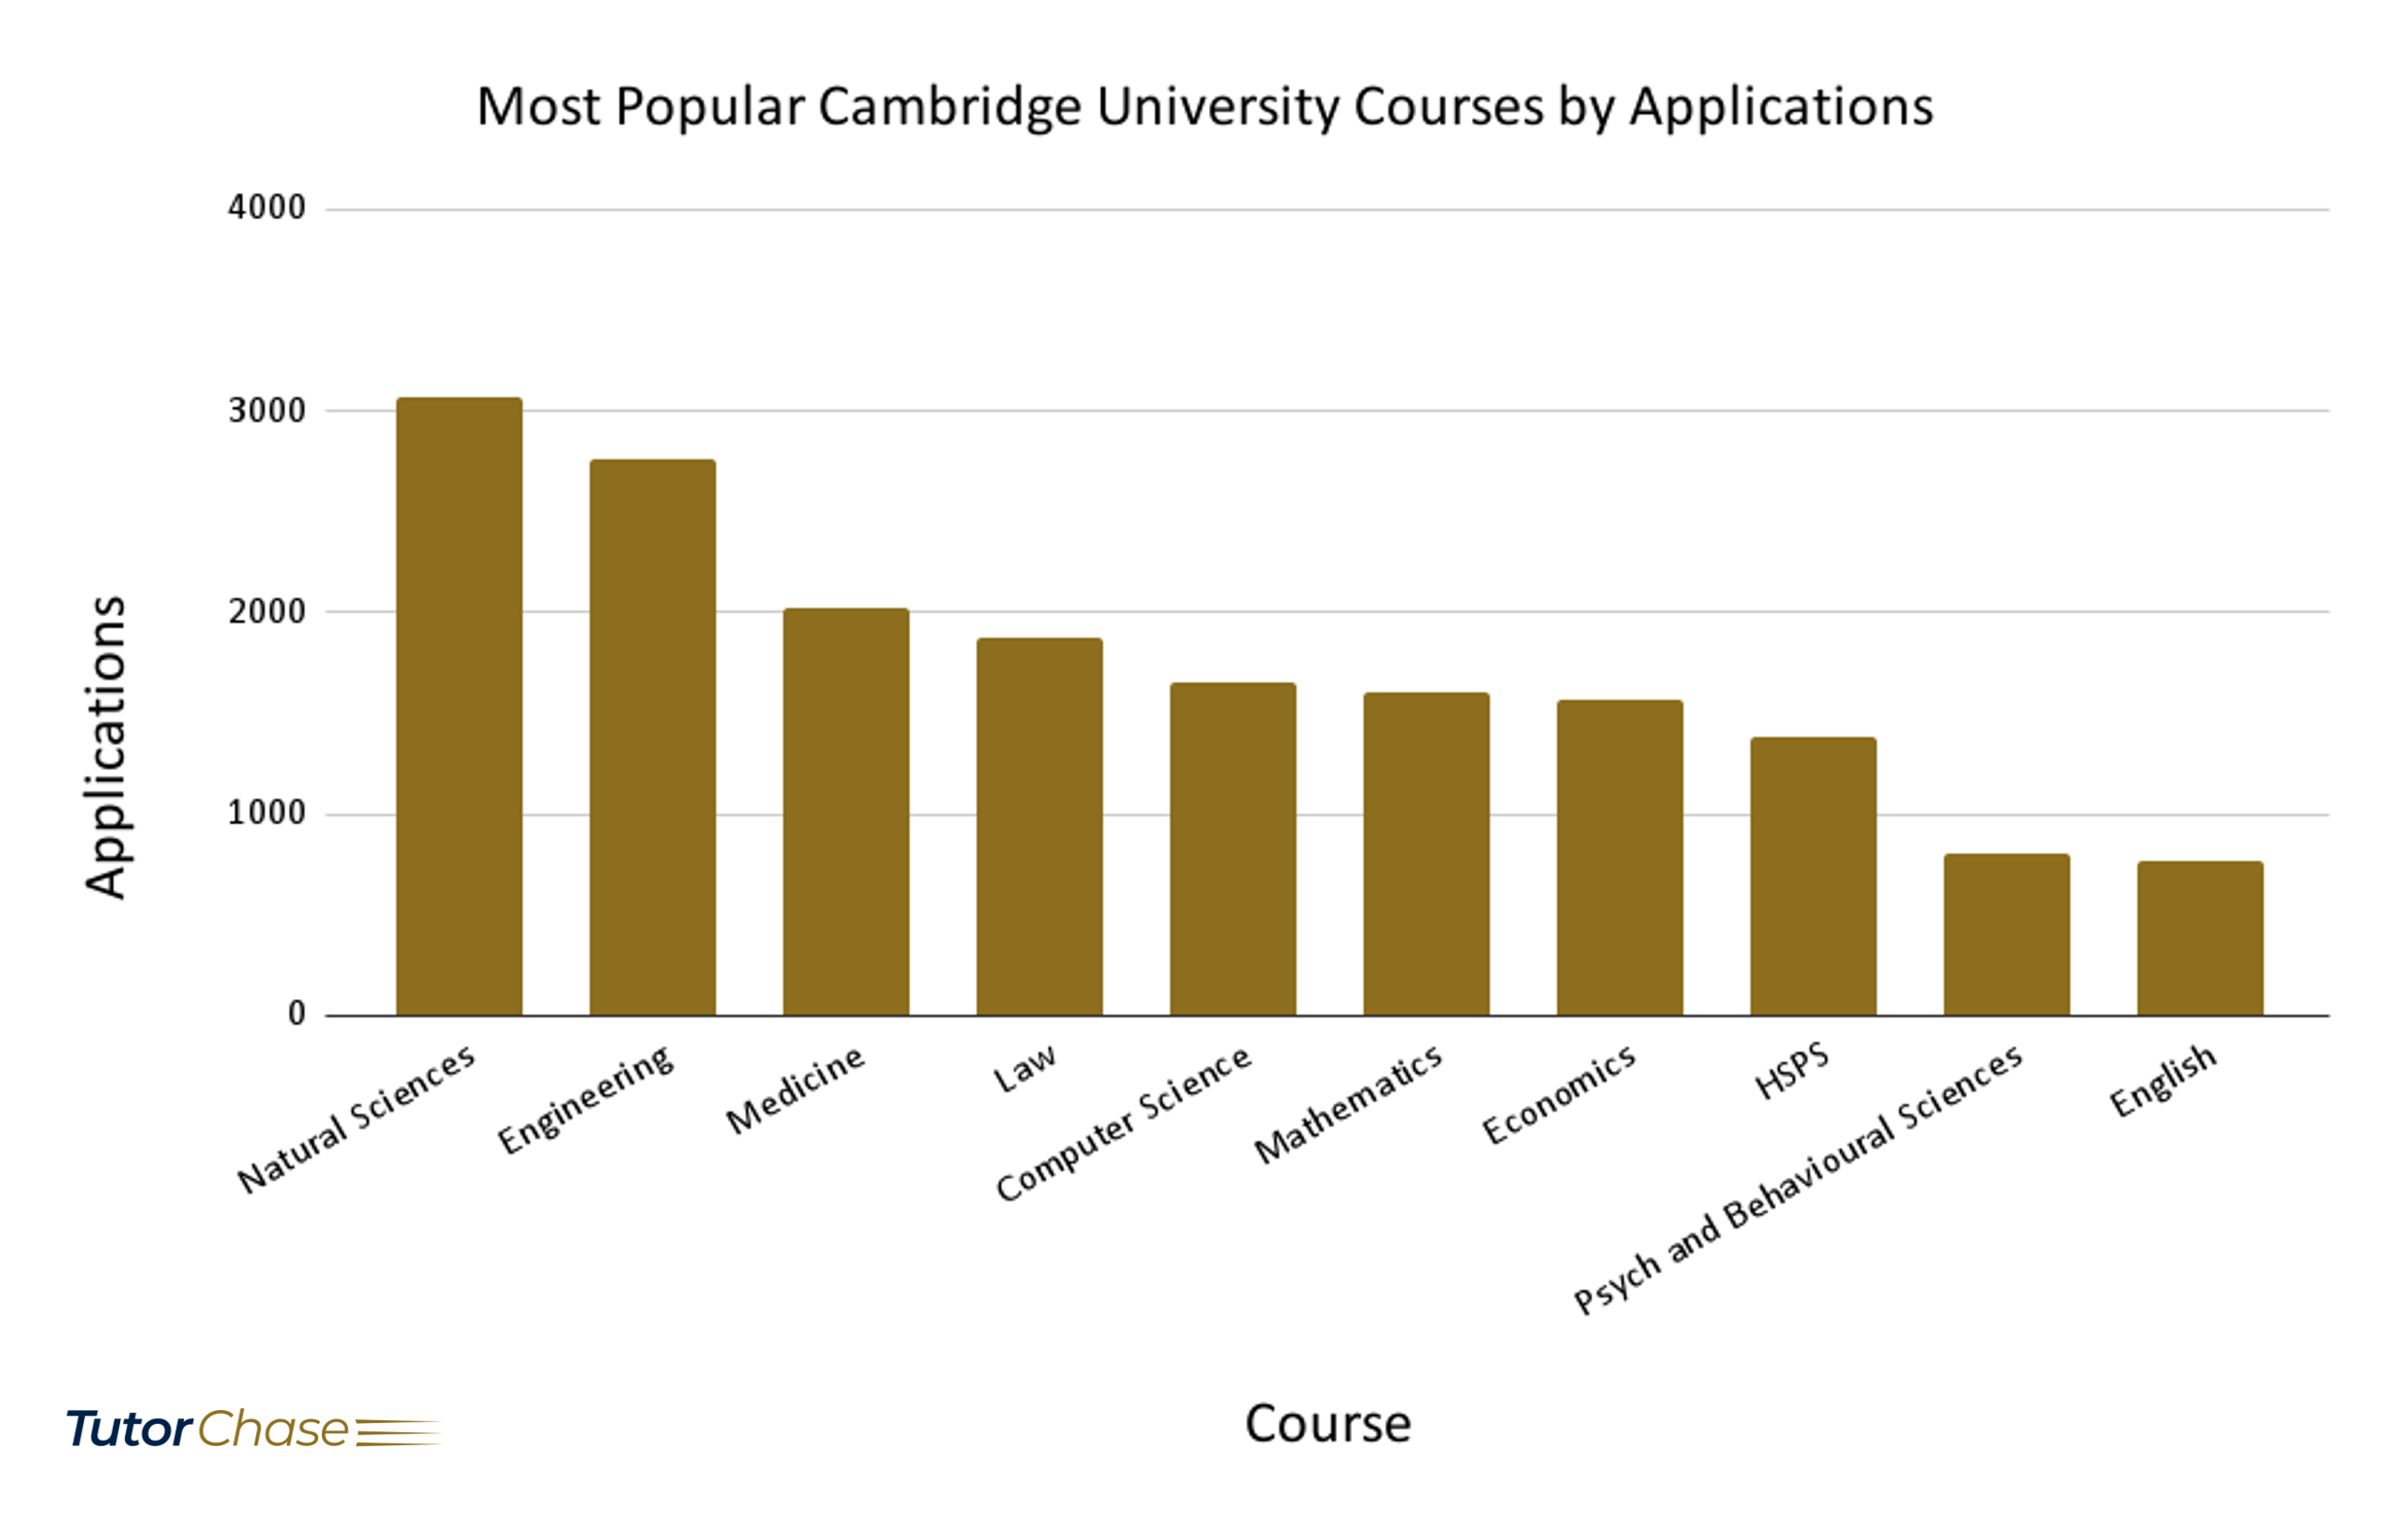 The Most Popular Cambridge University Courses by Applications